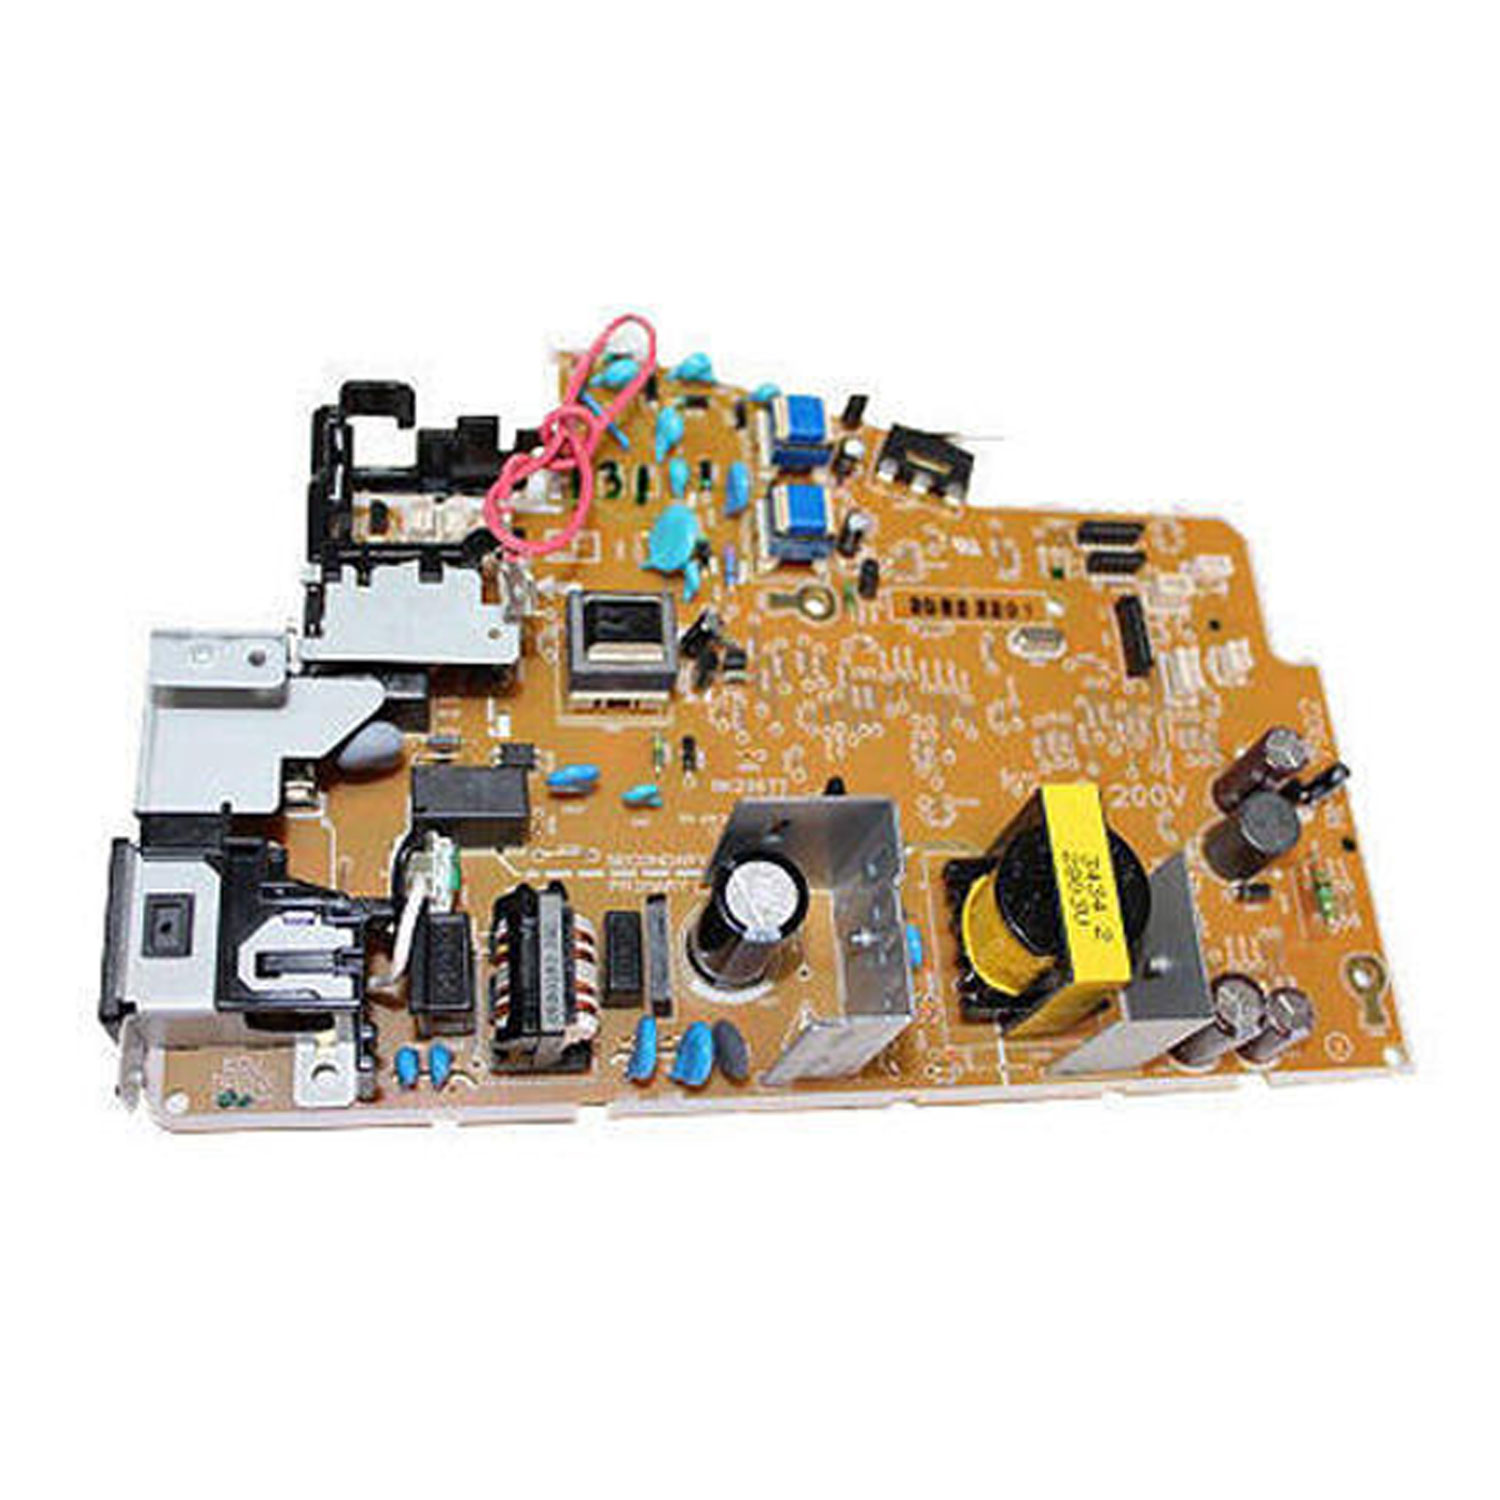 Hp 1108 POWER SUPPLY  for HP 1108 PRINTER